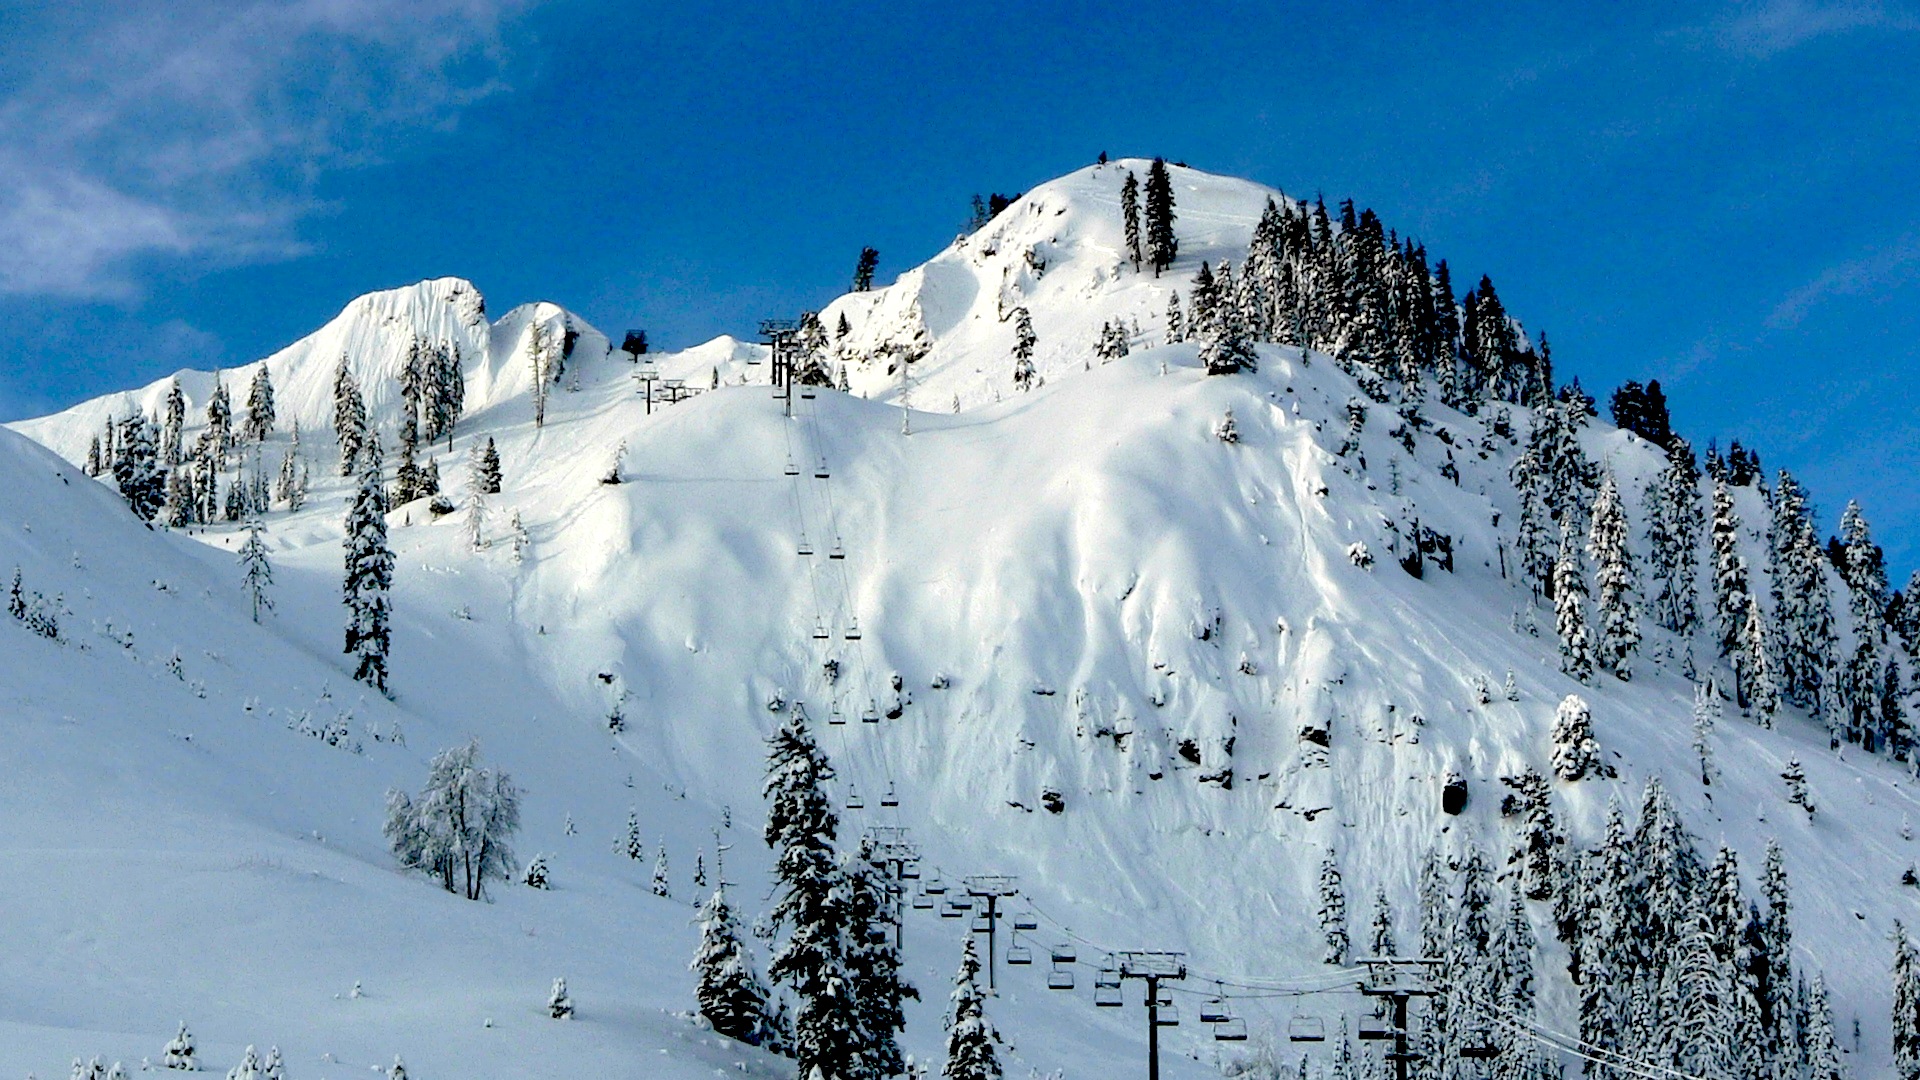 KT-22 at Squaw Valley, CA in March 2011. photo: snowbrains